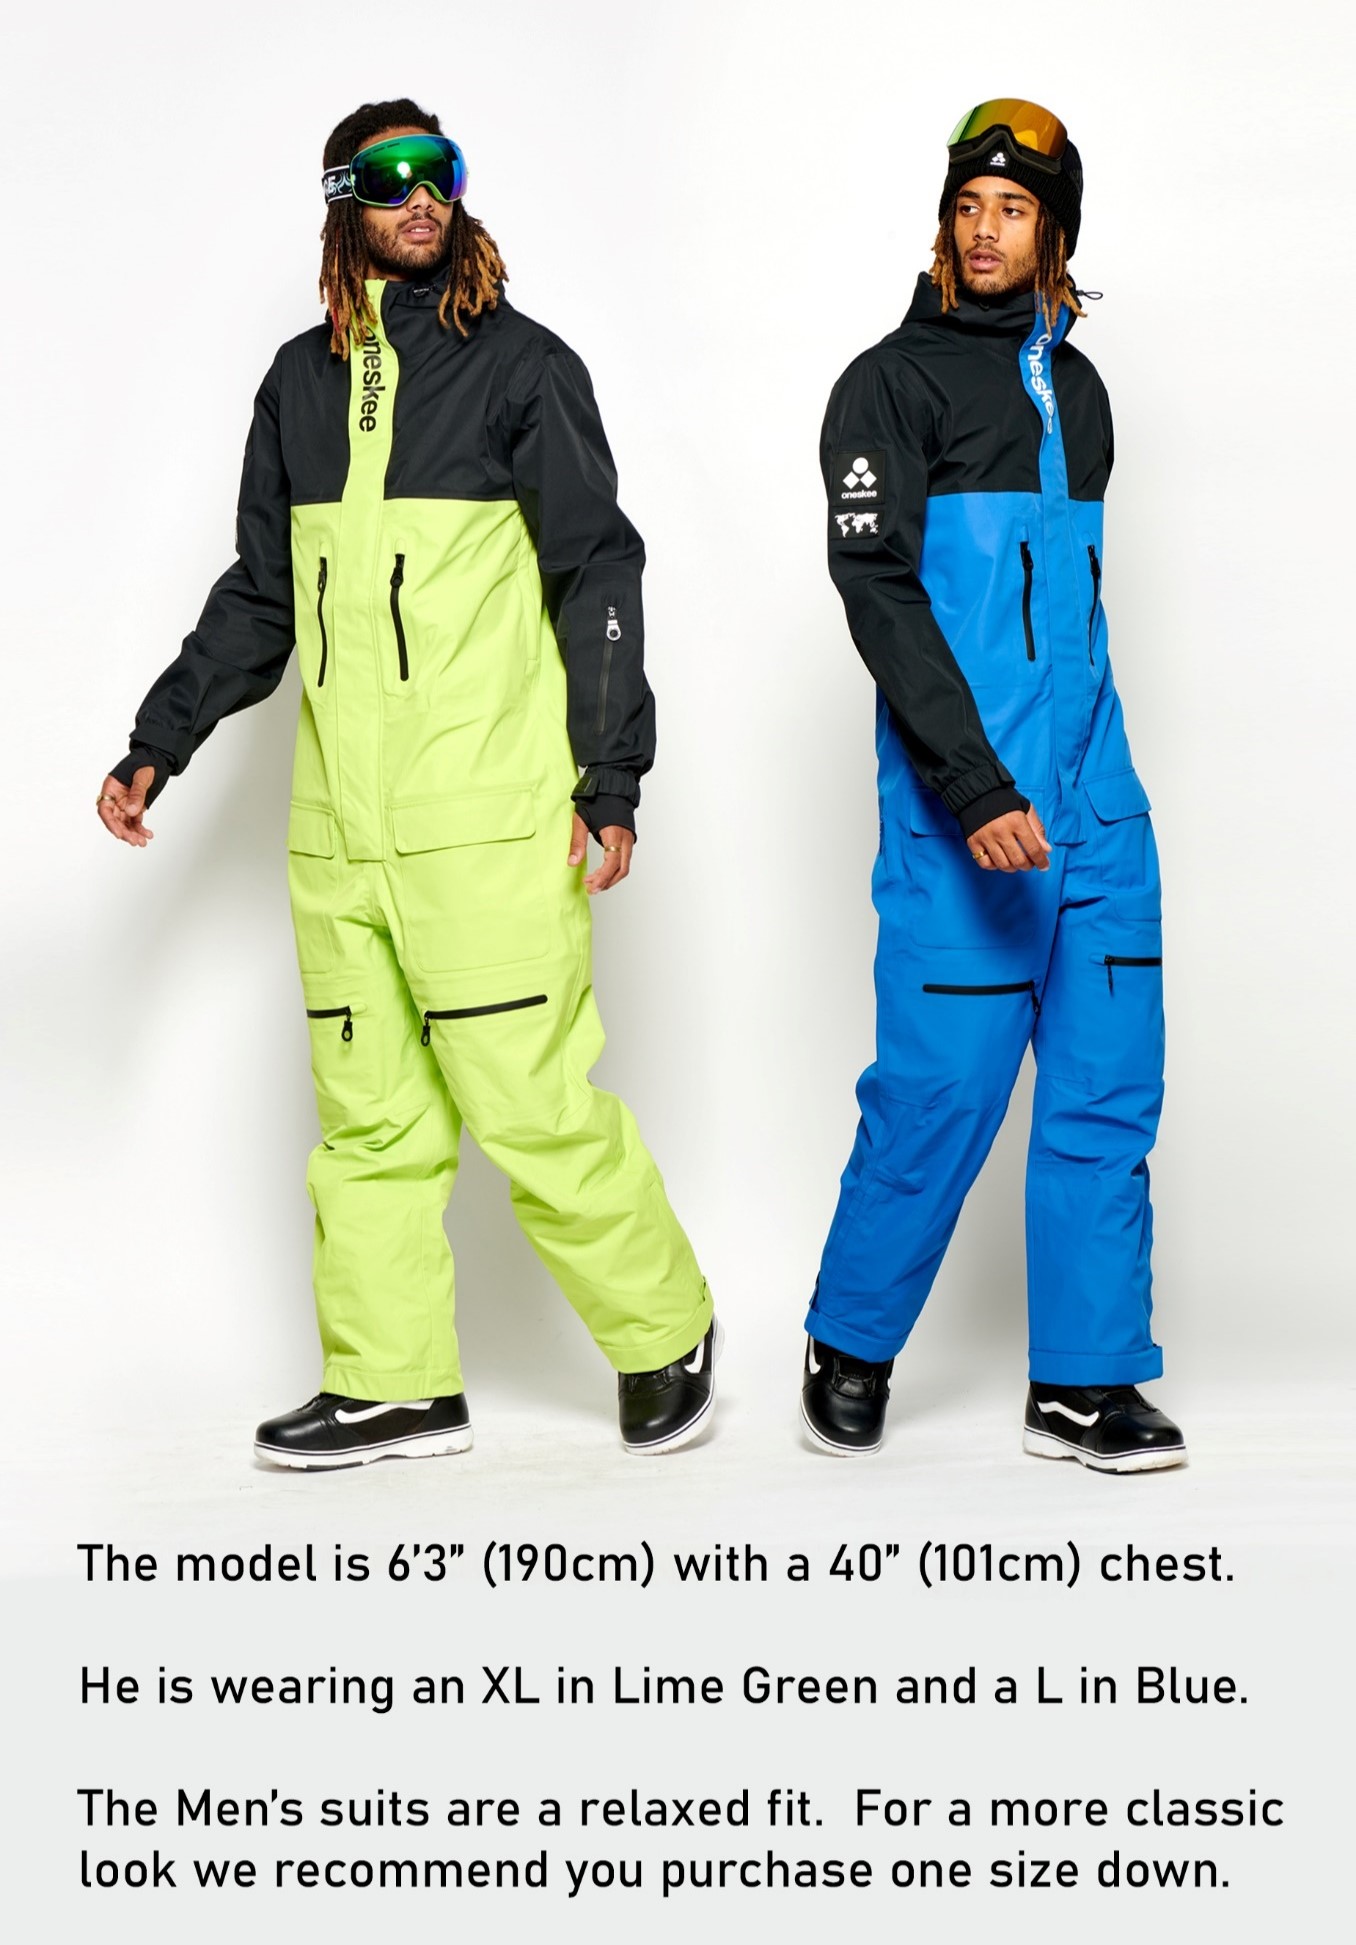 Male modelling 2 Ski Suits. The model is 6'3" (190cm) with a 40" (101cm) chest. He is wearing an XL in Lime Green and a L in Blue. The Men's suits are a relaxed fit. For a more classic look we recommend you purchase one size down.